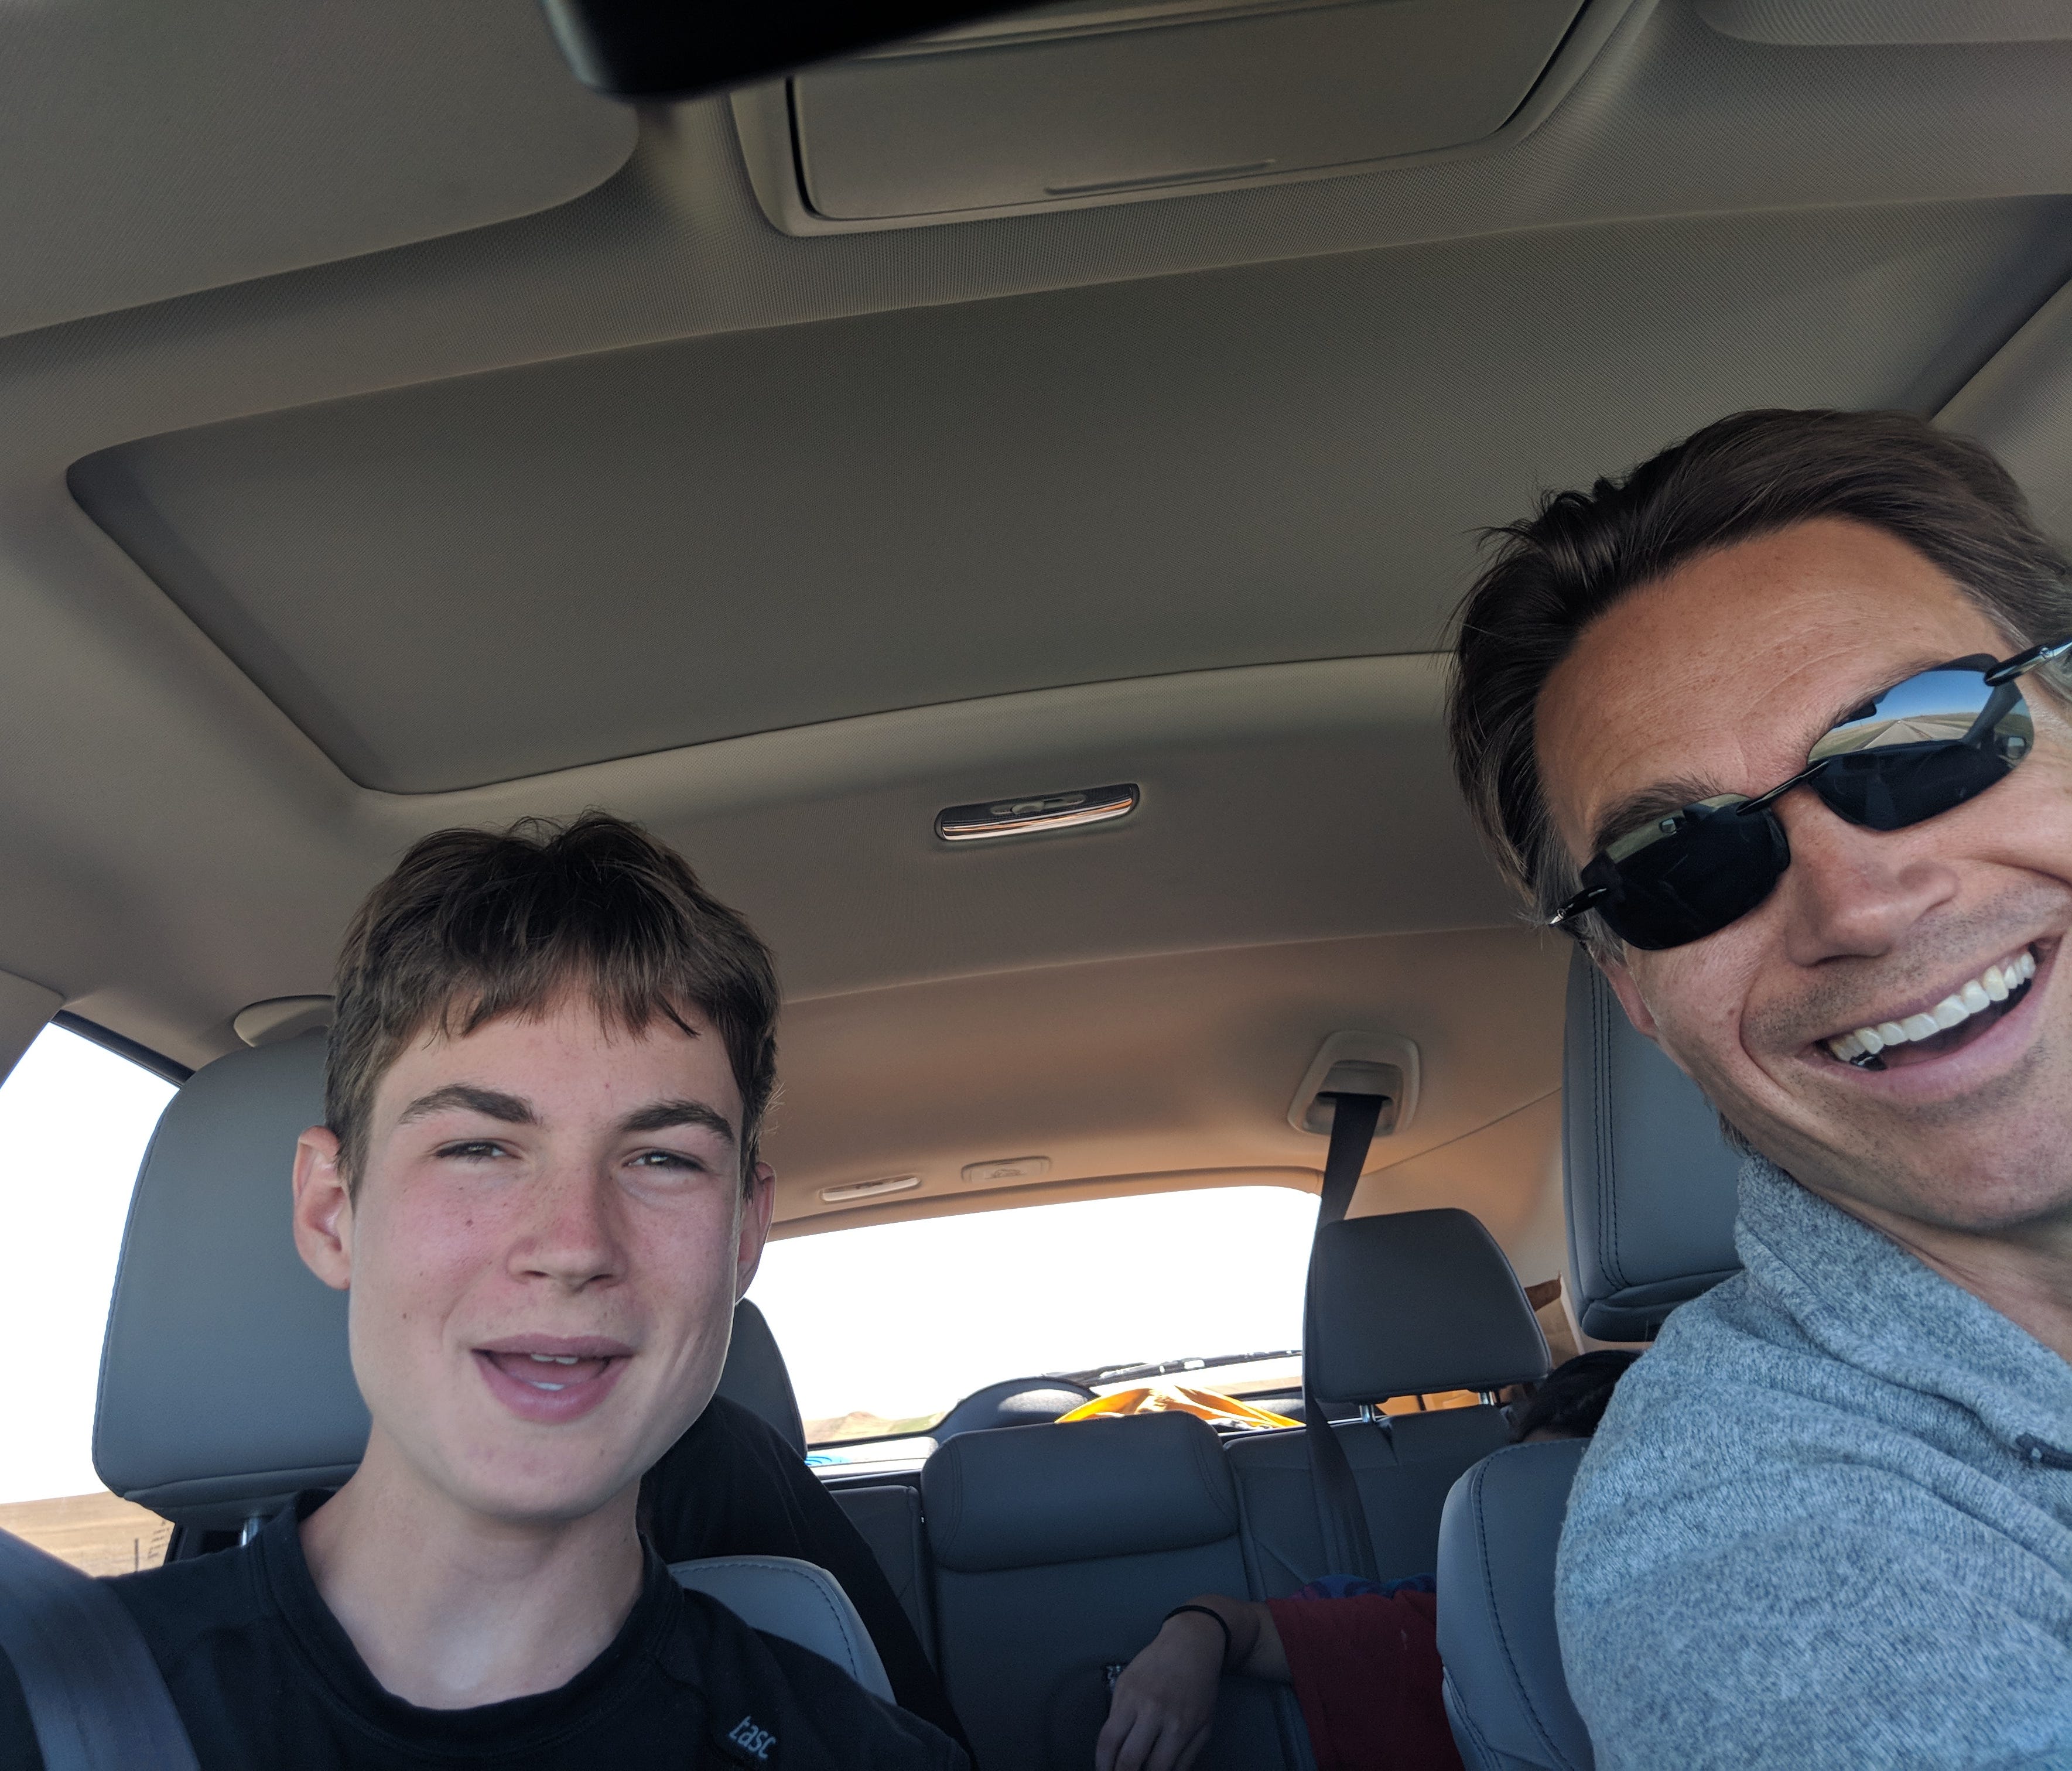 Aren Elliott (left) and the author get a little silly after two full days in the car. Note Aren's sister in the back, sleeping.